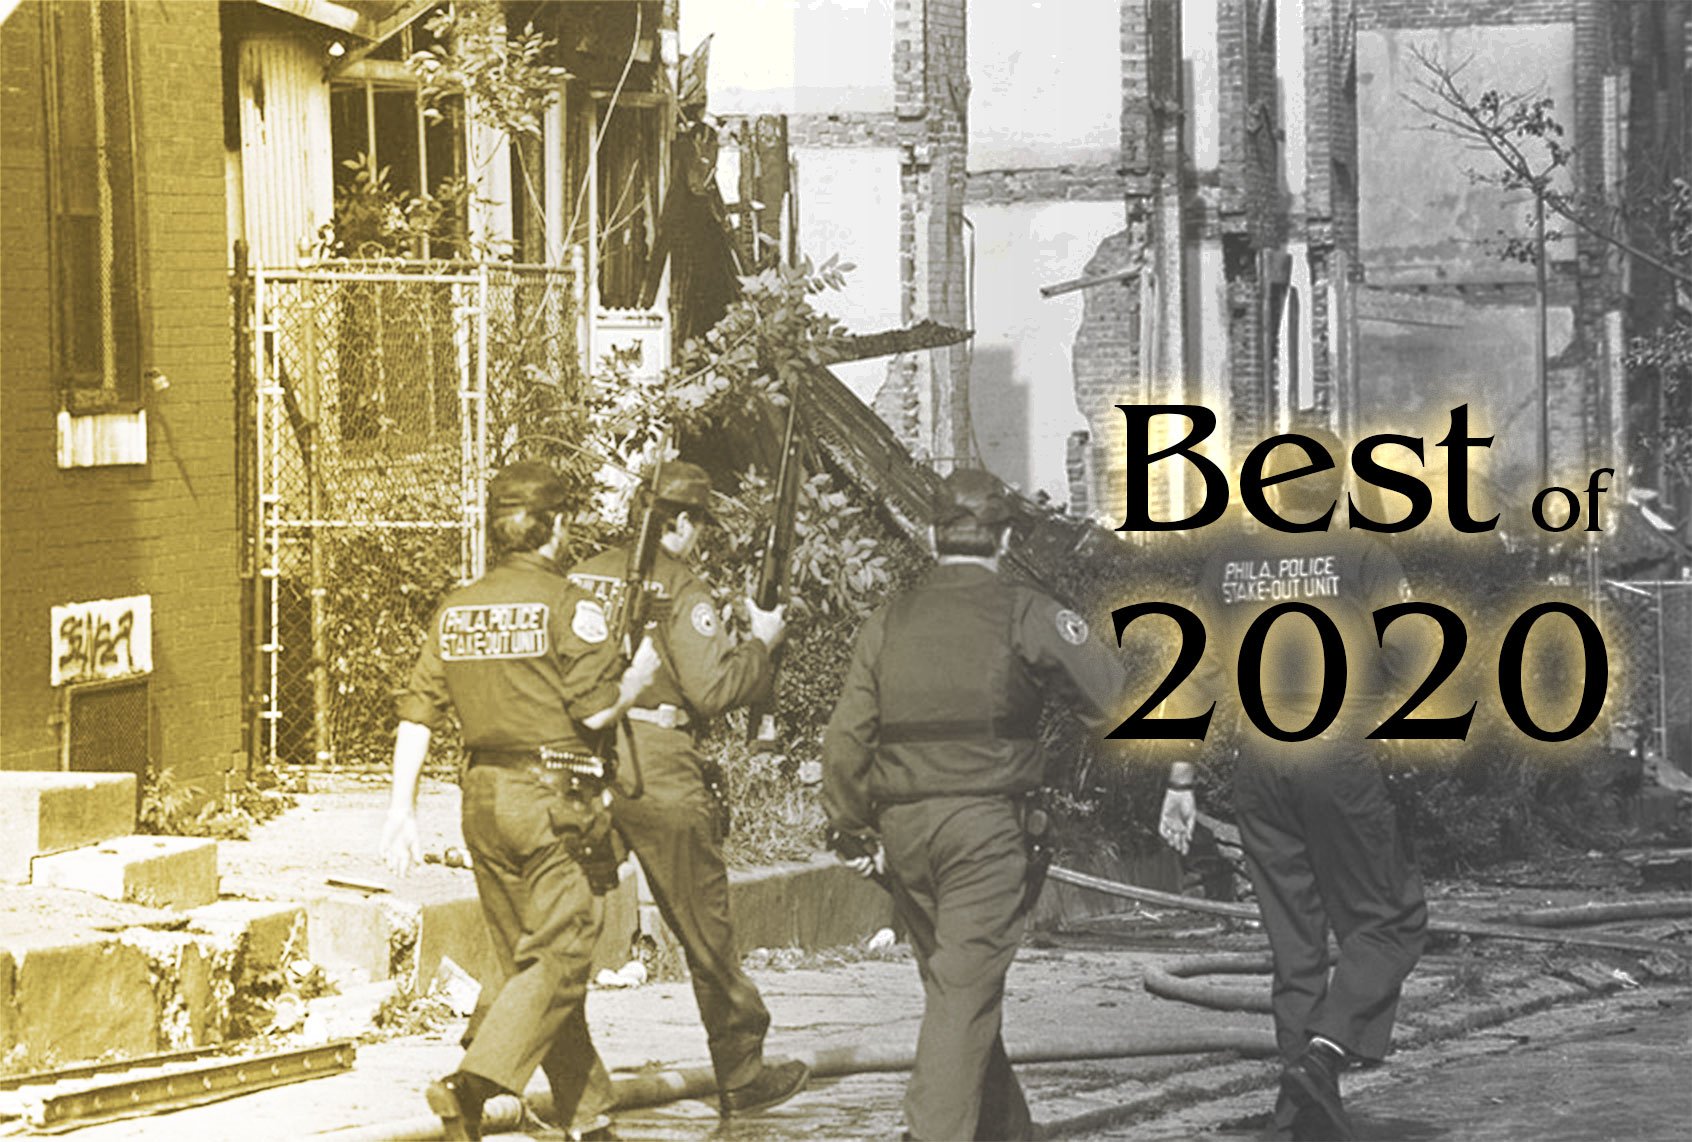 Better of 2020: Philadelphia’s deadly MOVE bombing and me